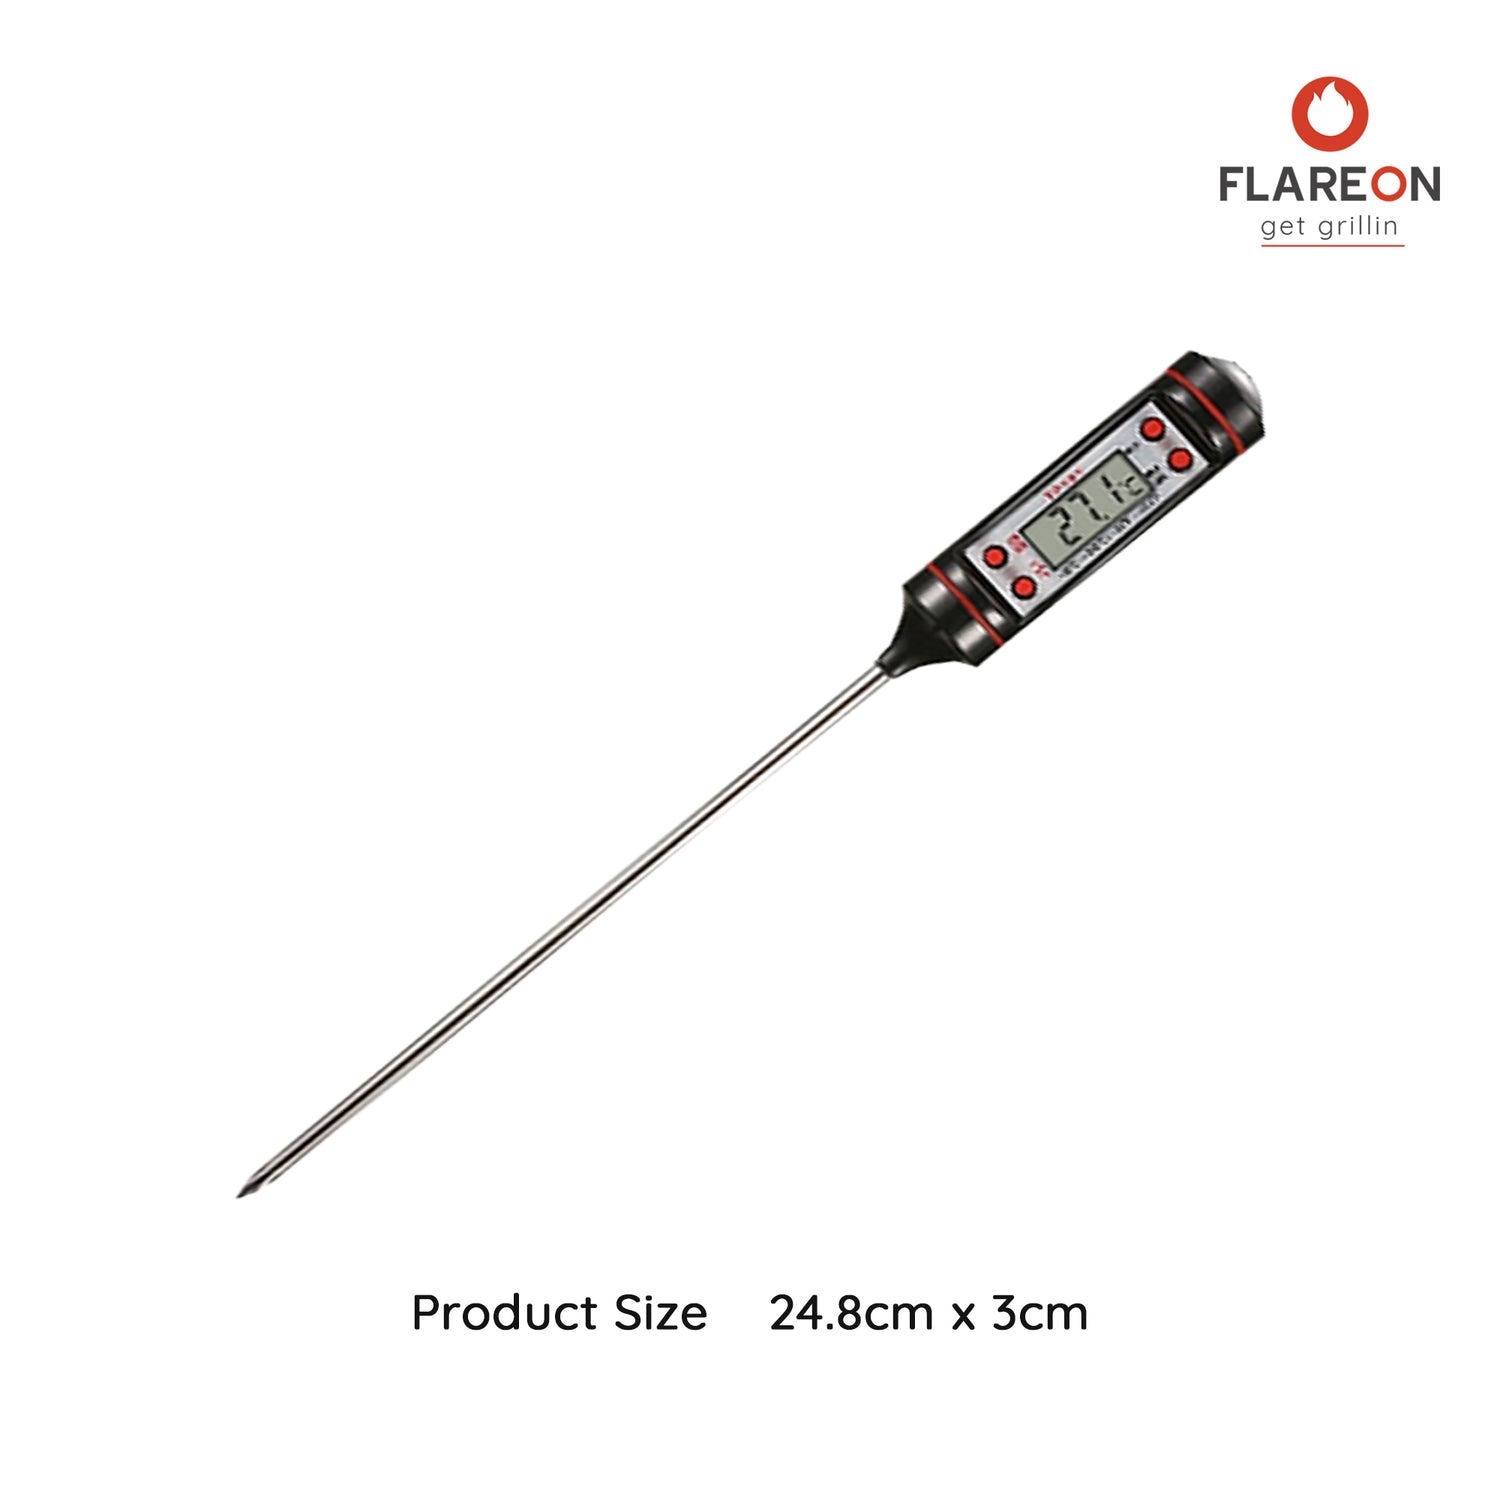 Digital Food Thermometer- Product Size